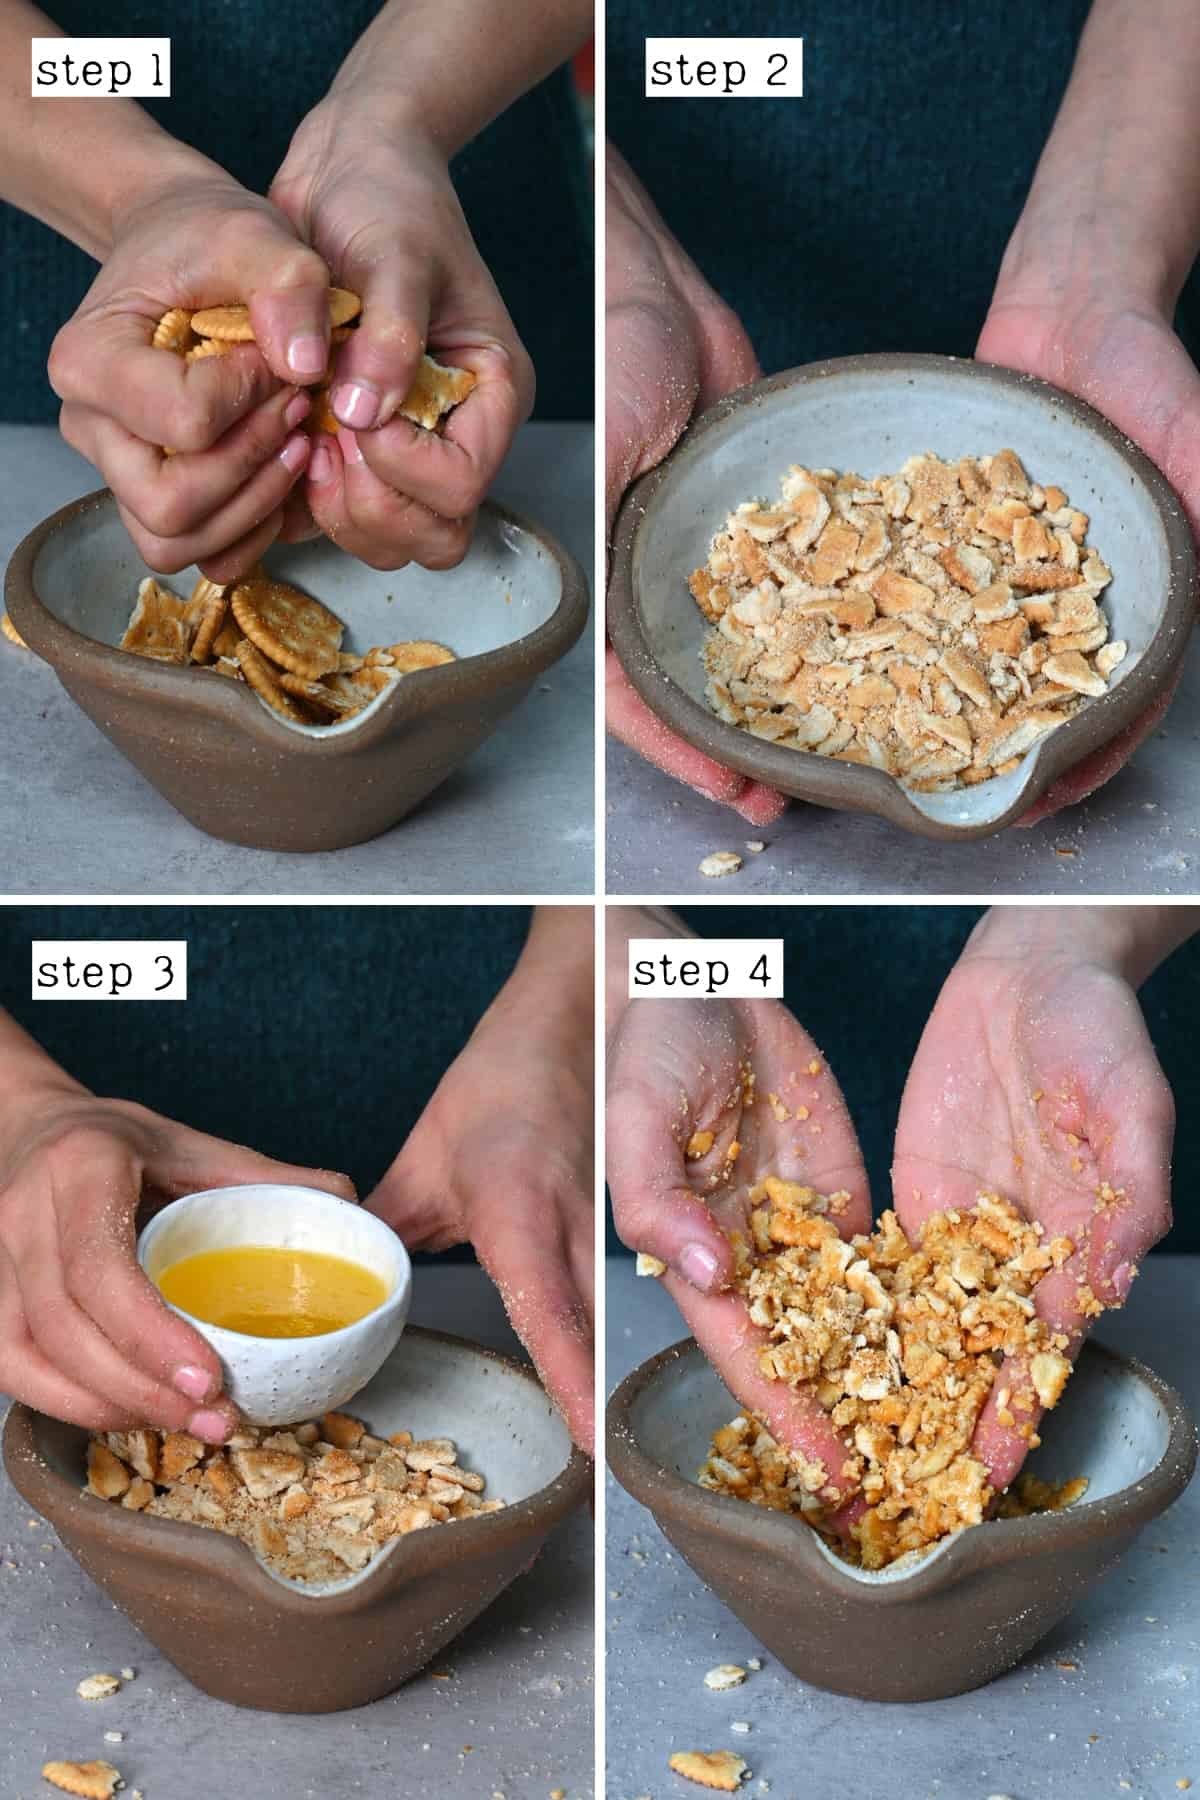 Steps for mixing crackers with melted cheese